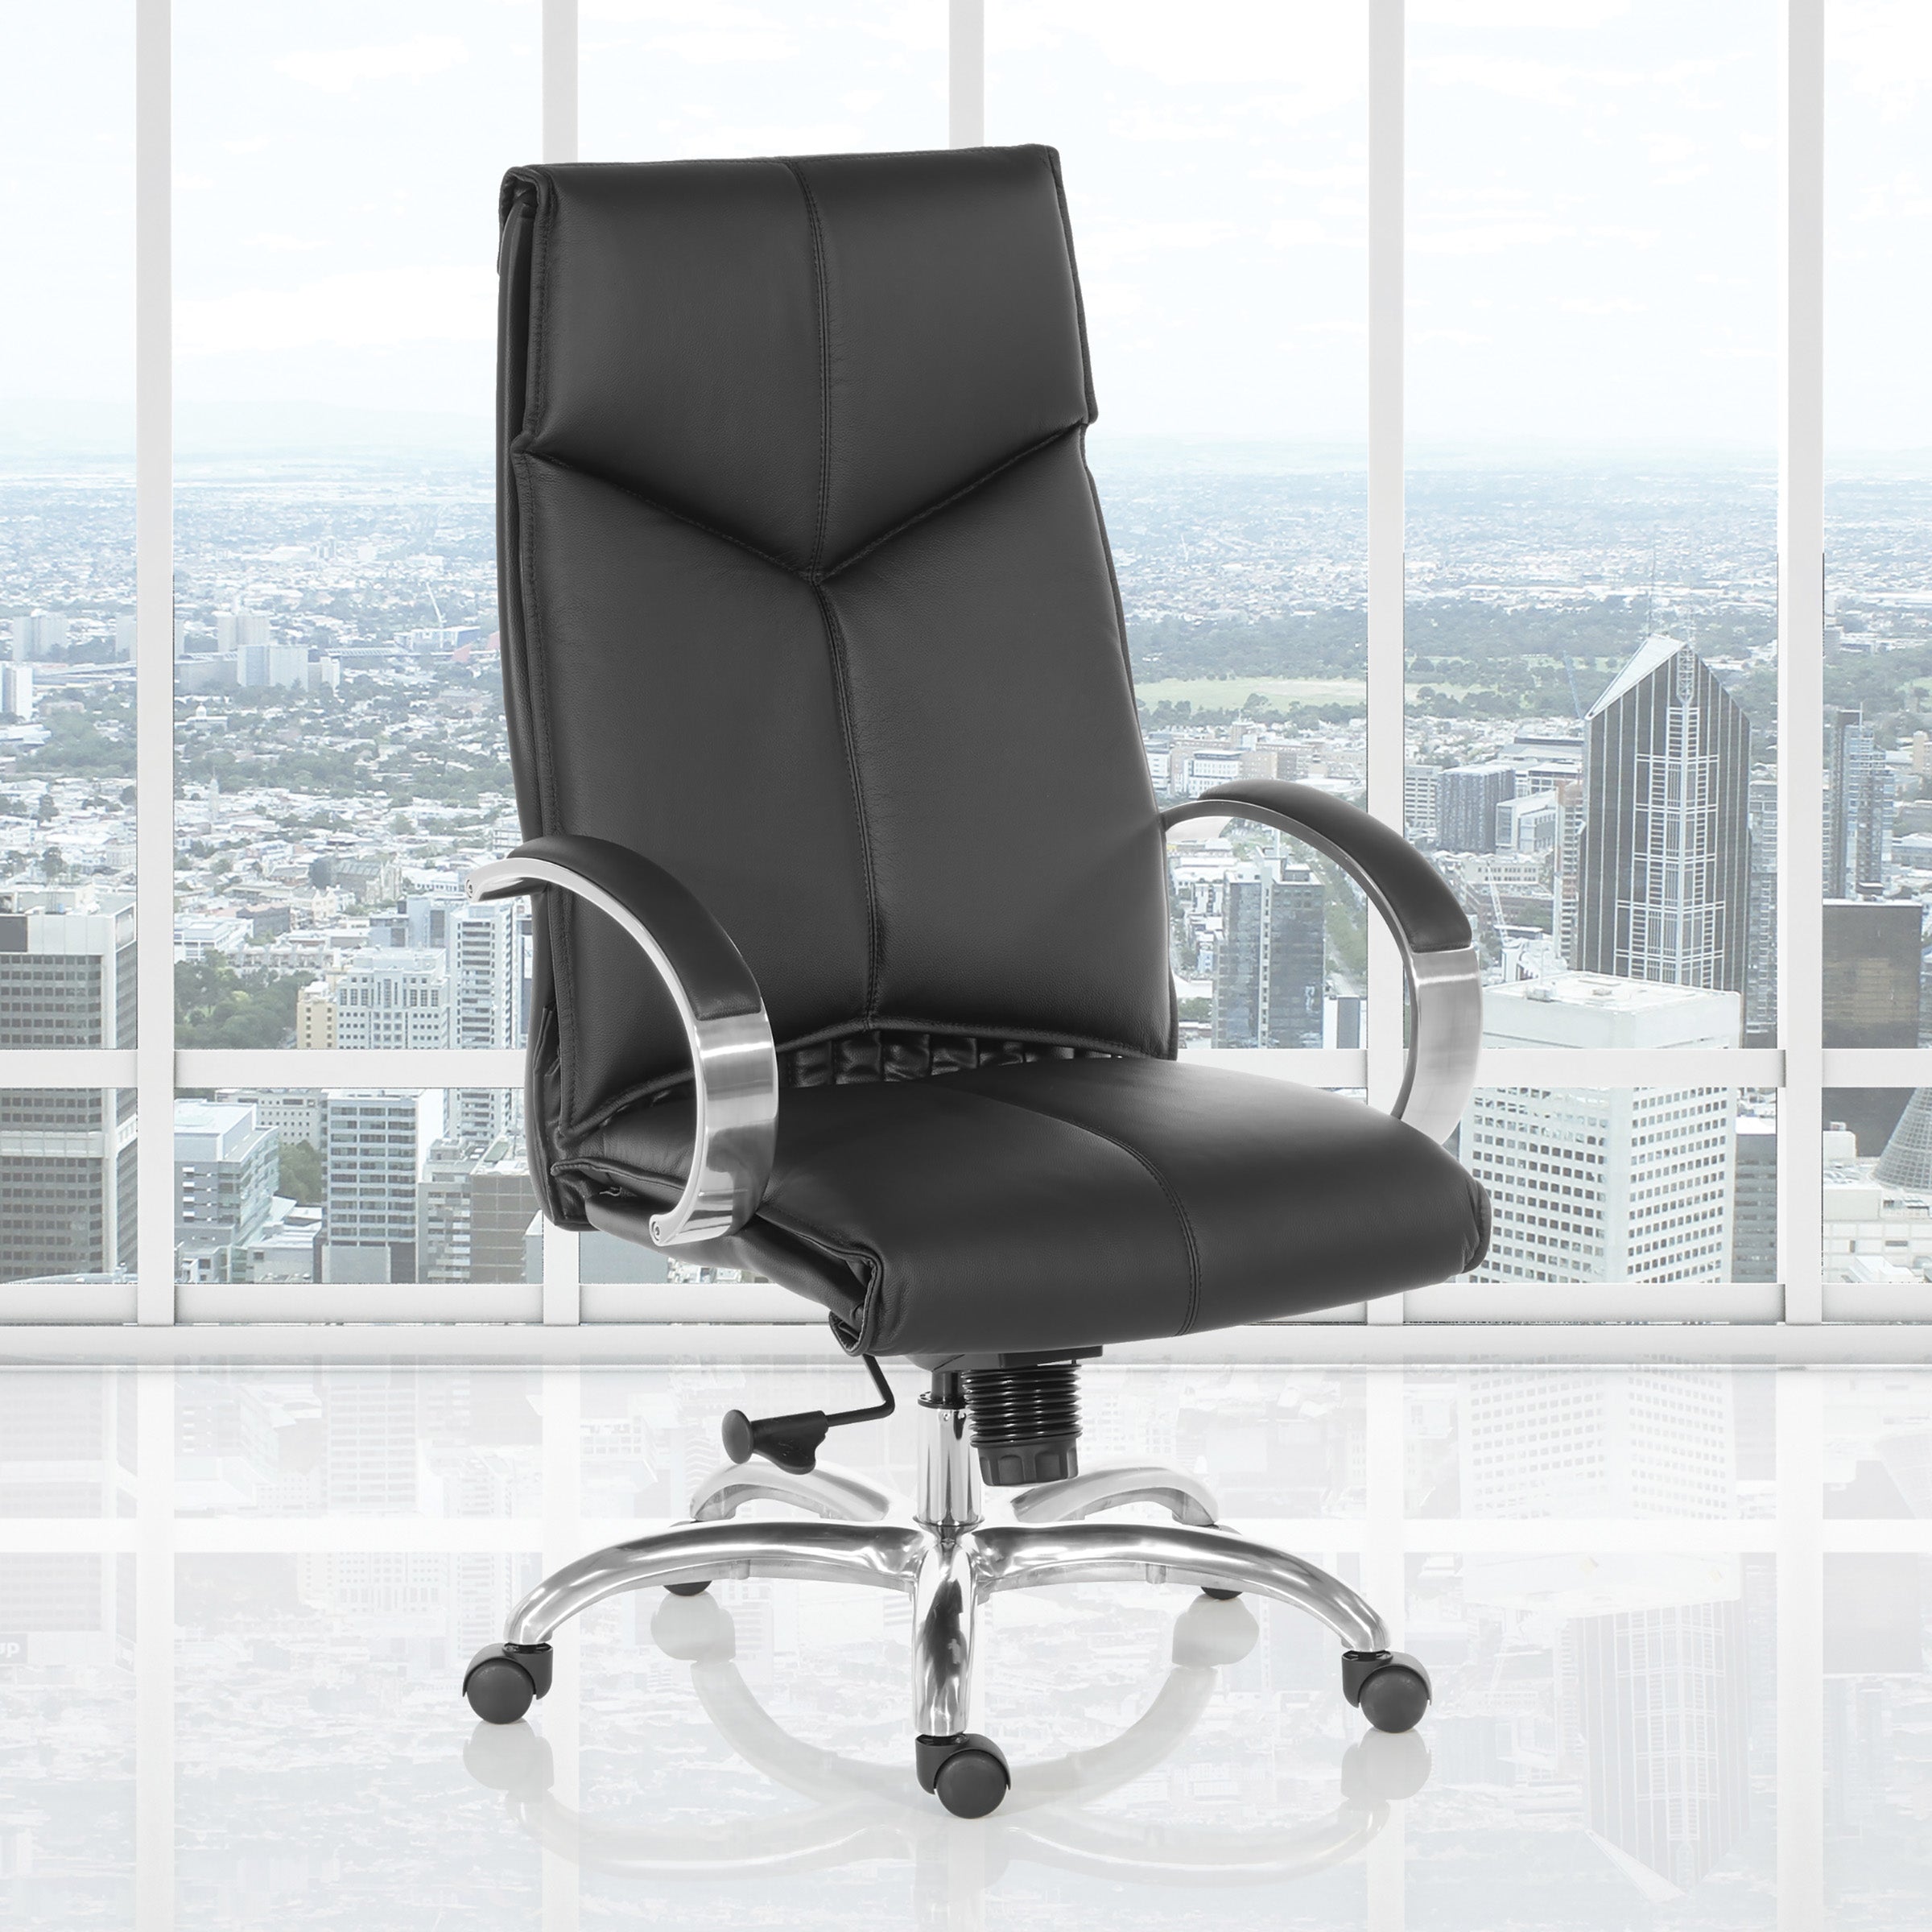 8200 - Deluxe High Back Executive Leather Chair with Chrome Base